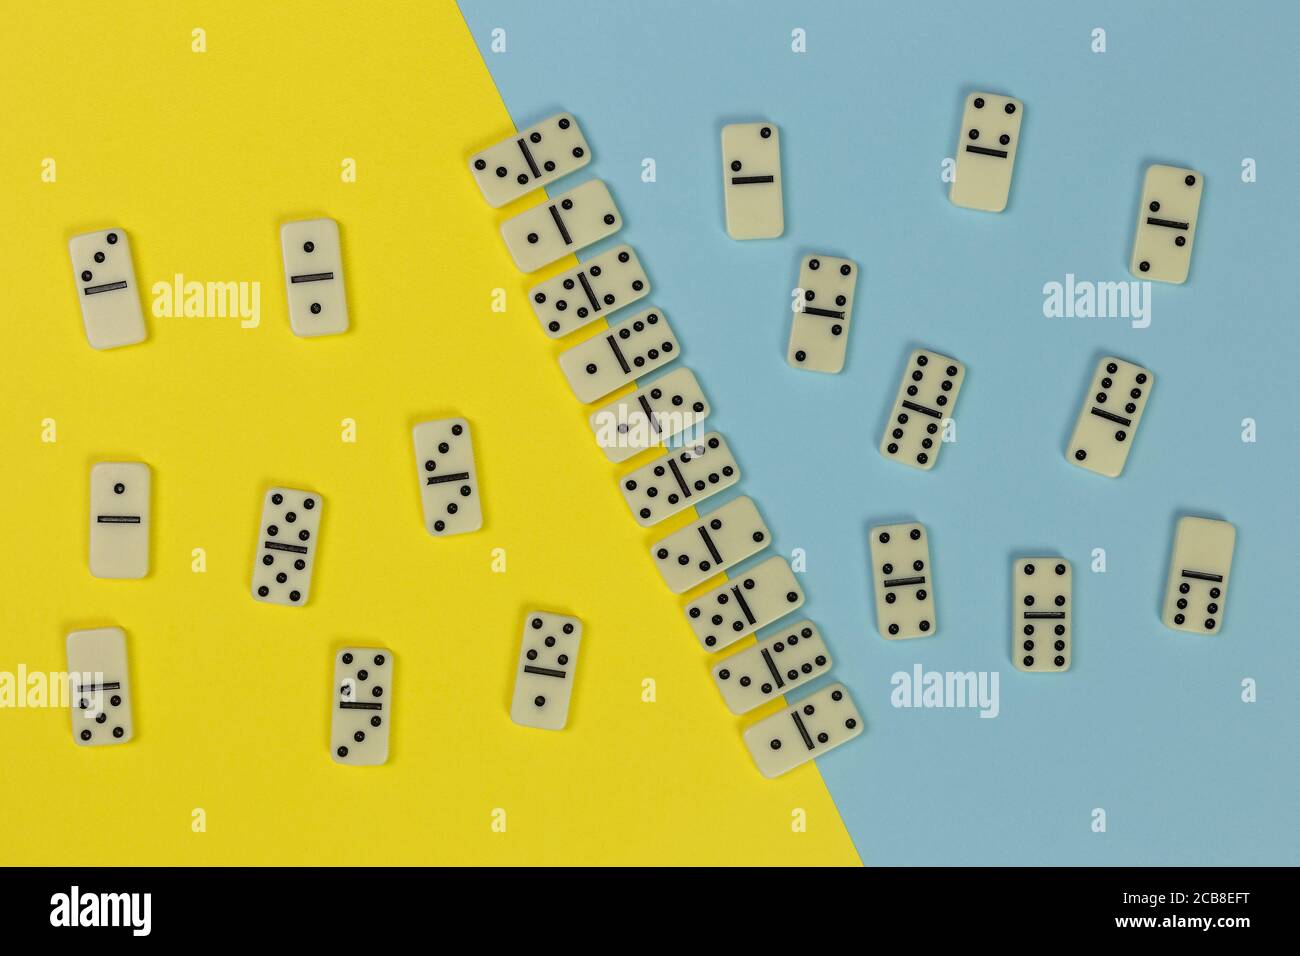 domino game concept, tiles organized in even and odd on the two-tone yellow and blue surface, top view Stock Photo